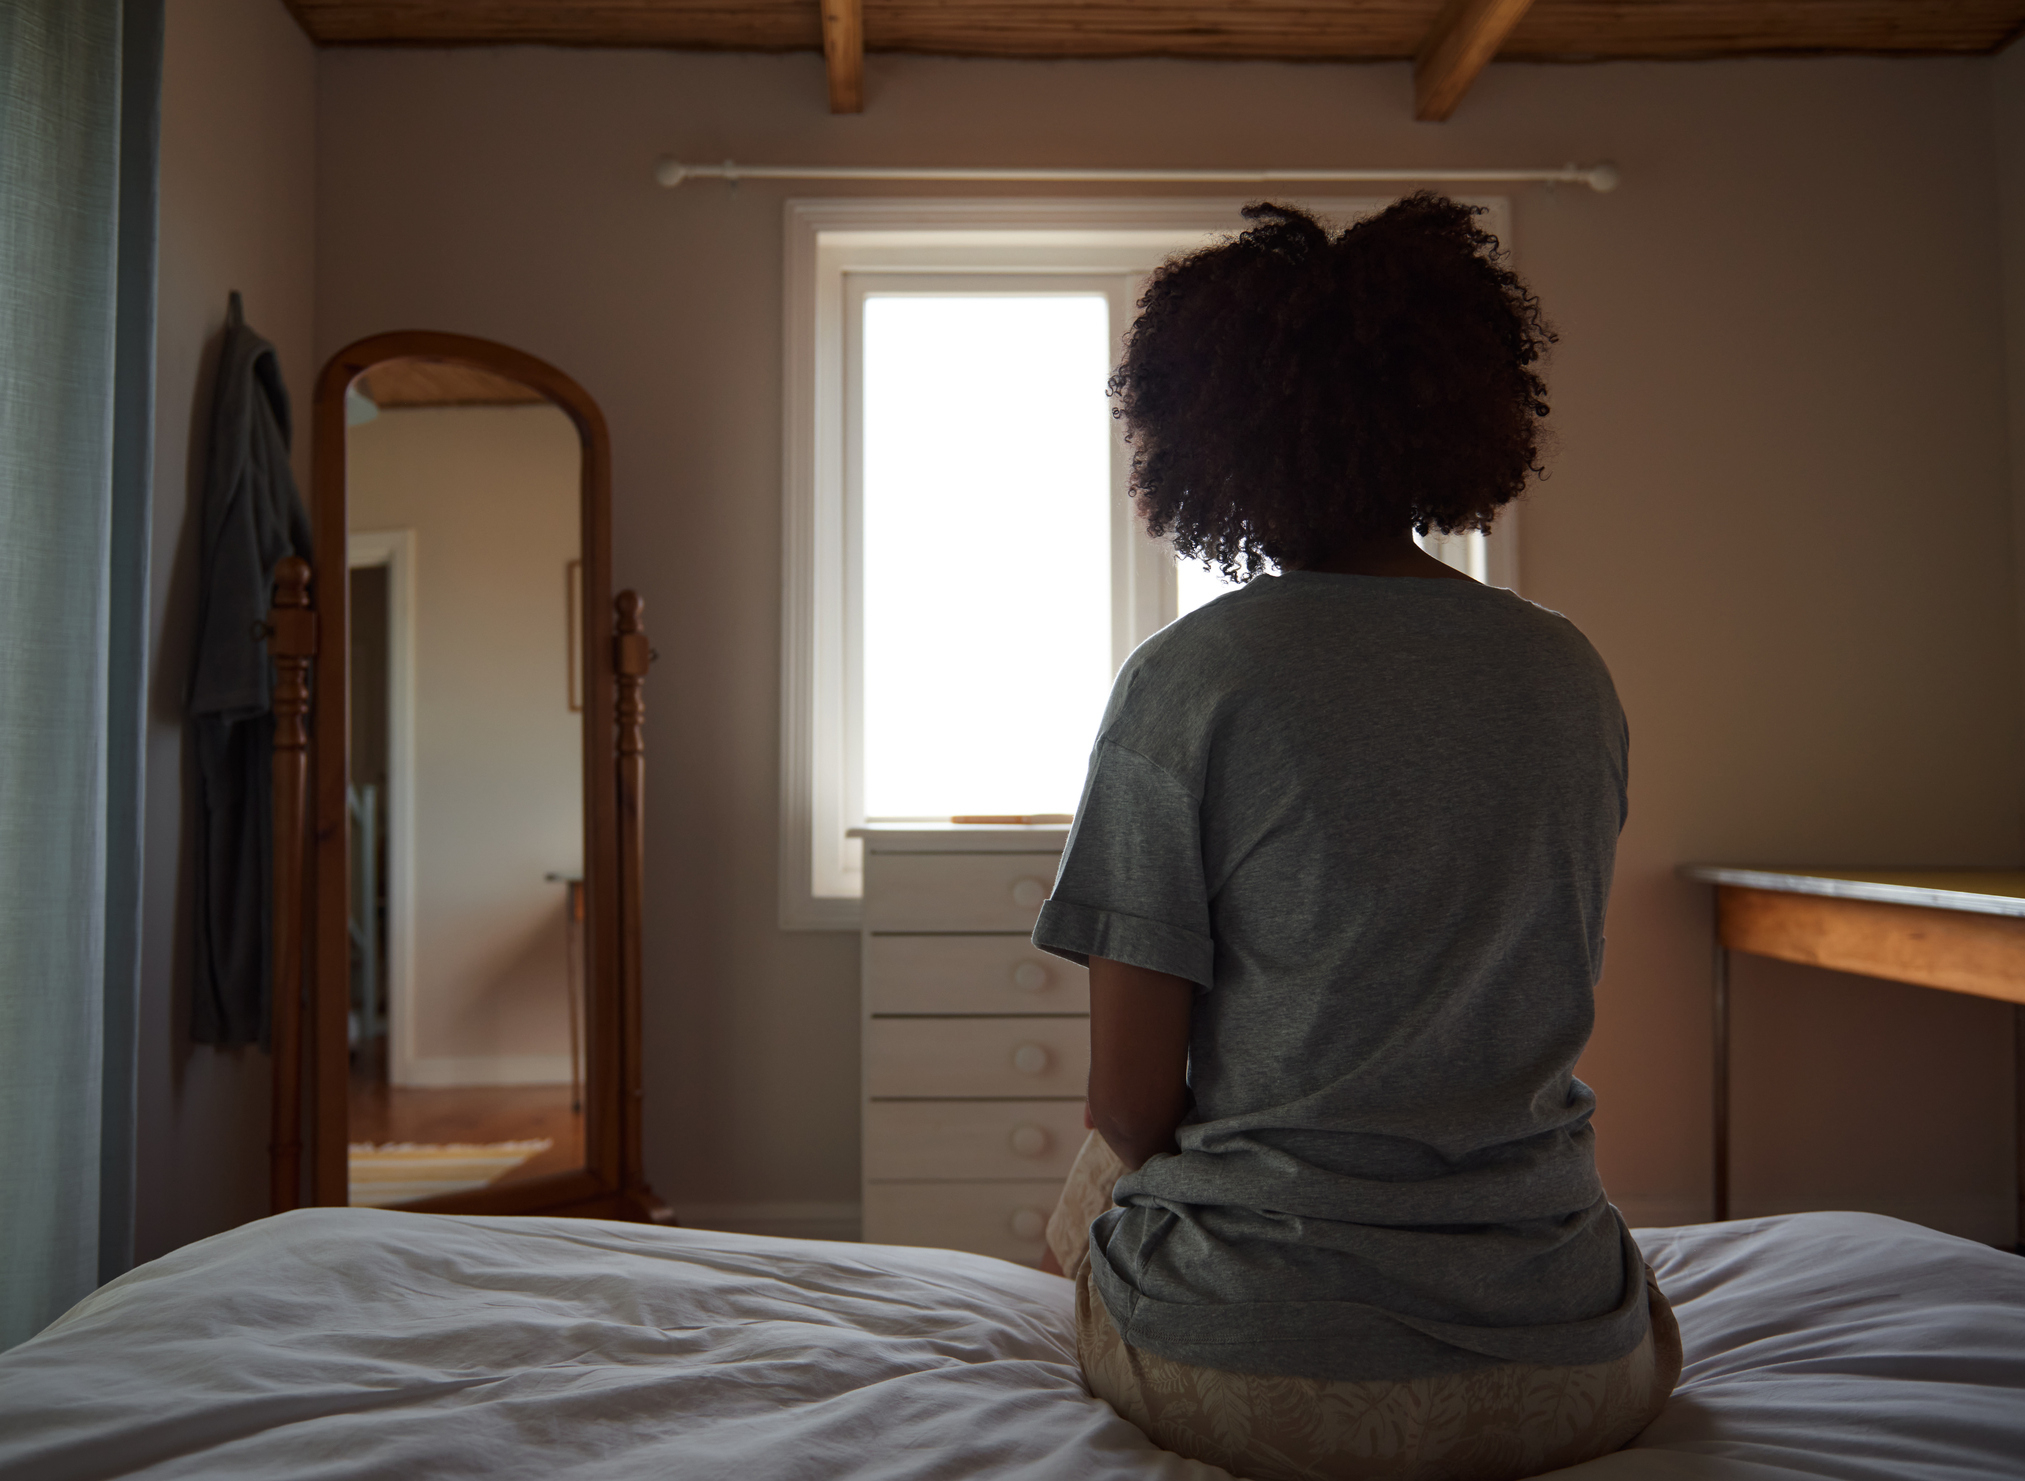 Person sitting on a bed facing a window and mirror, appearing deep in thought in a cozy bedroom